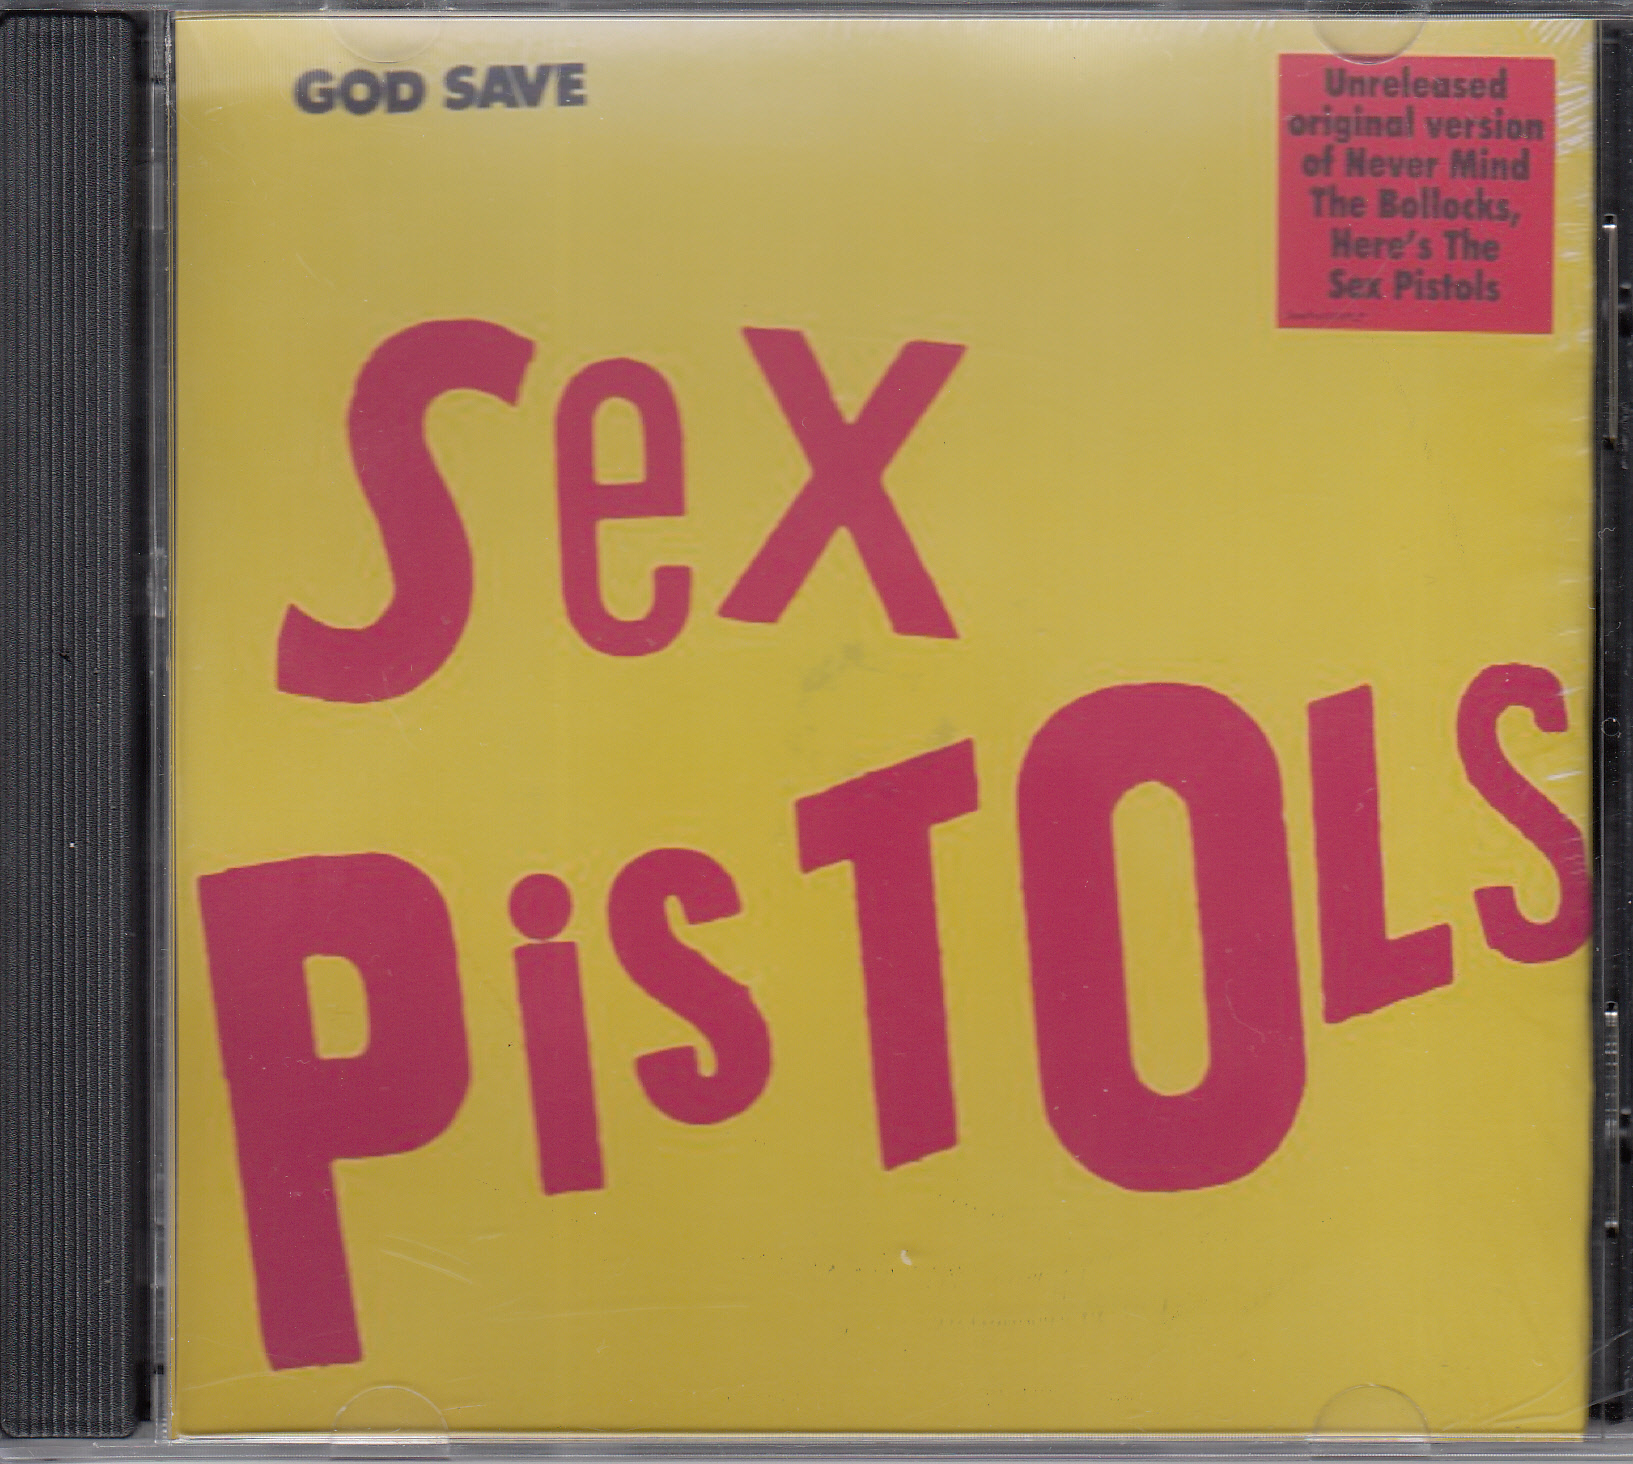 CD front